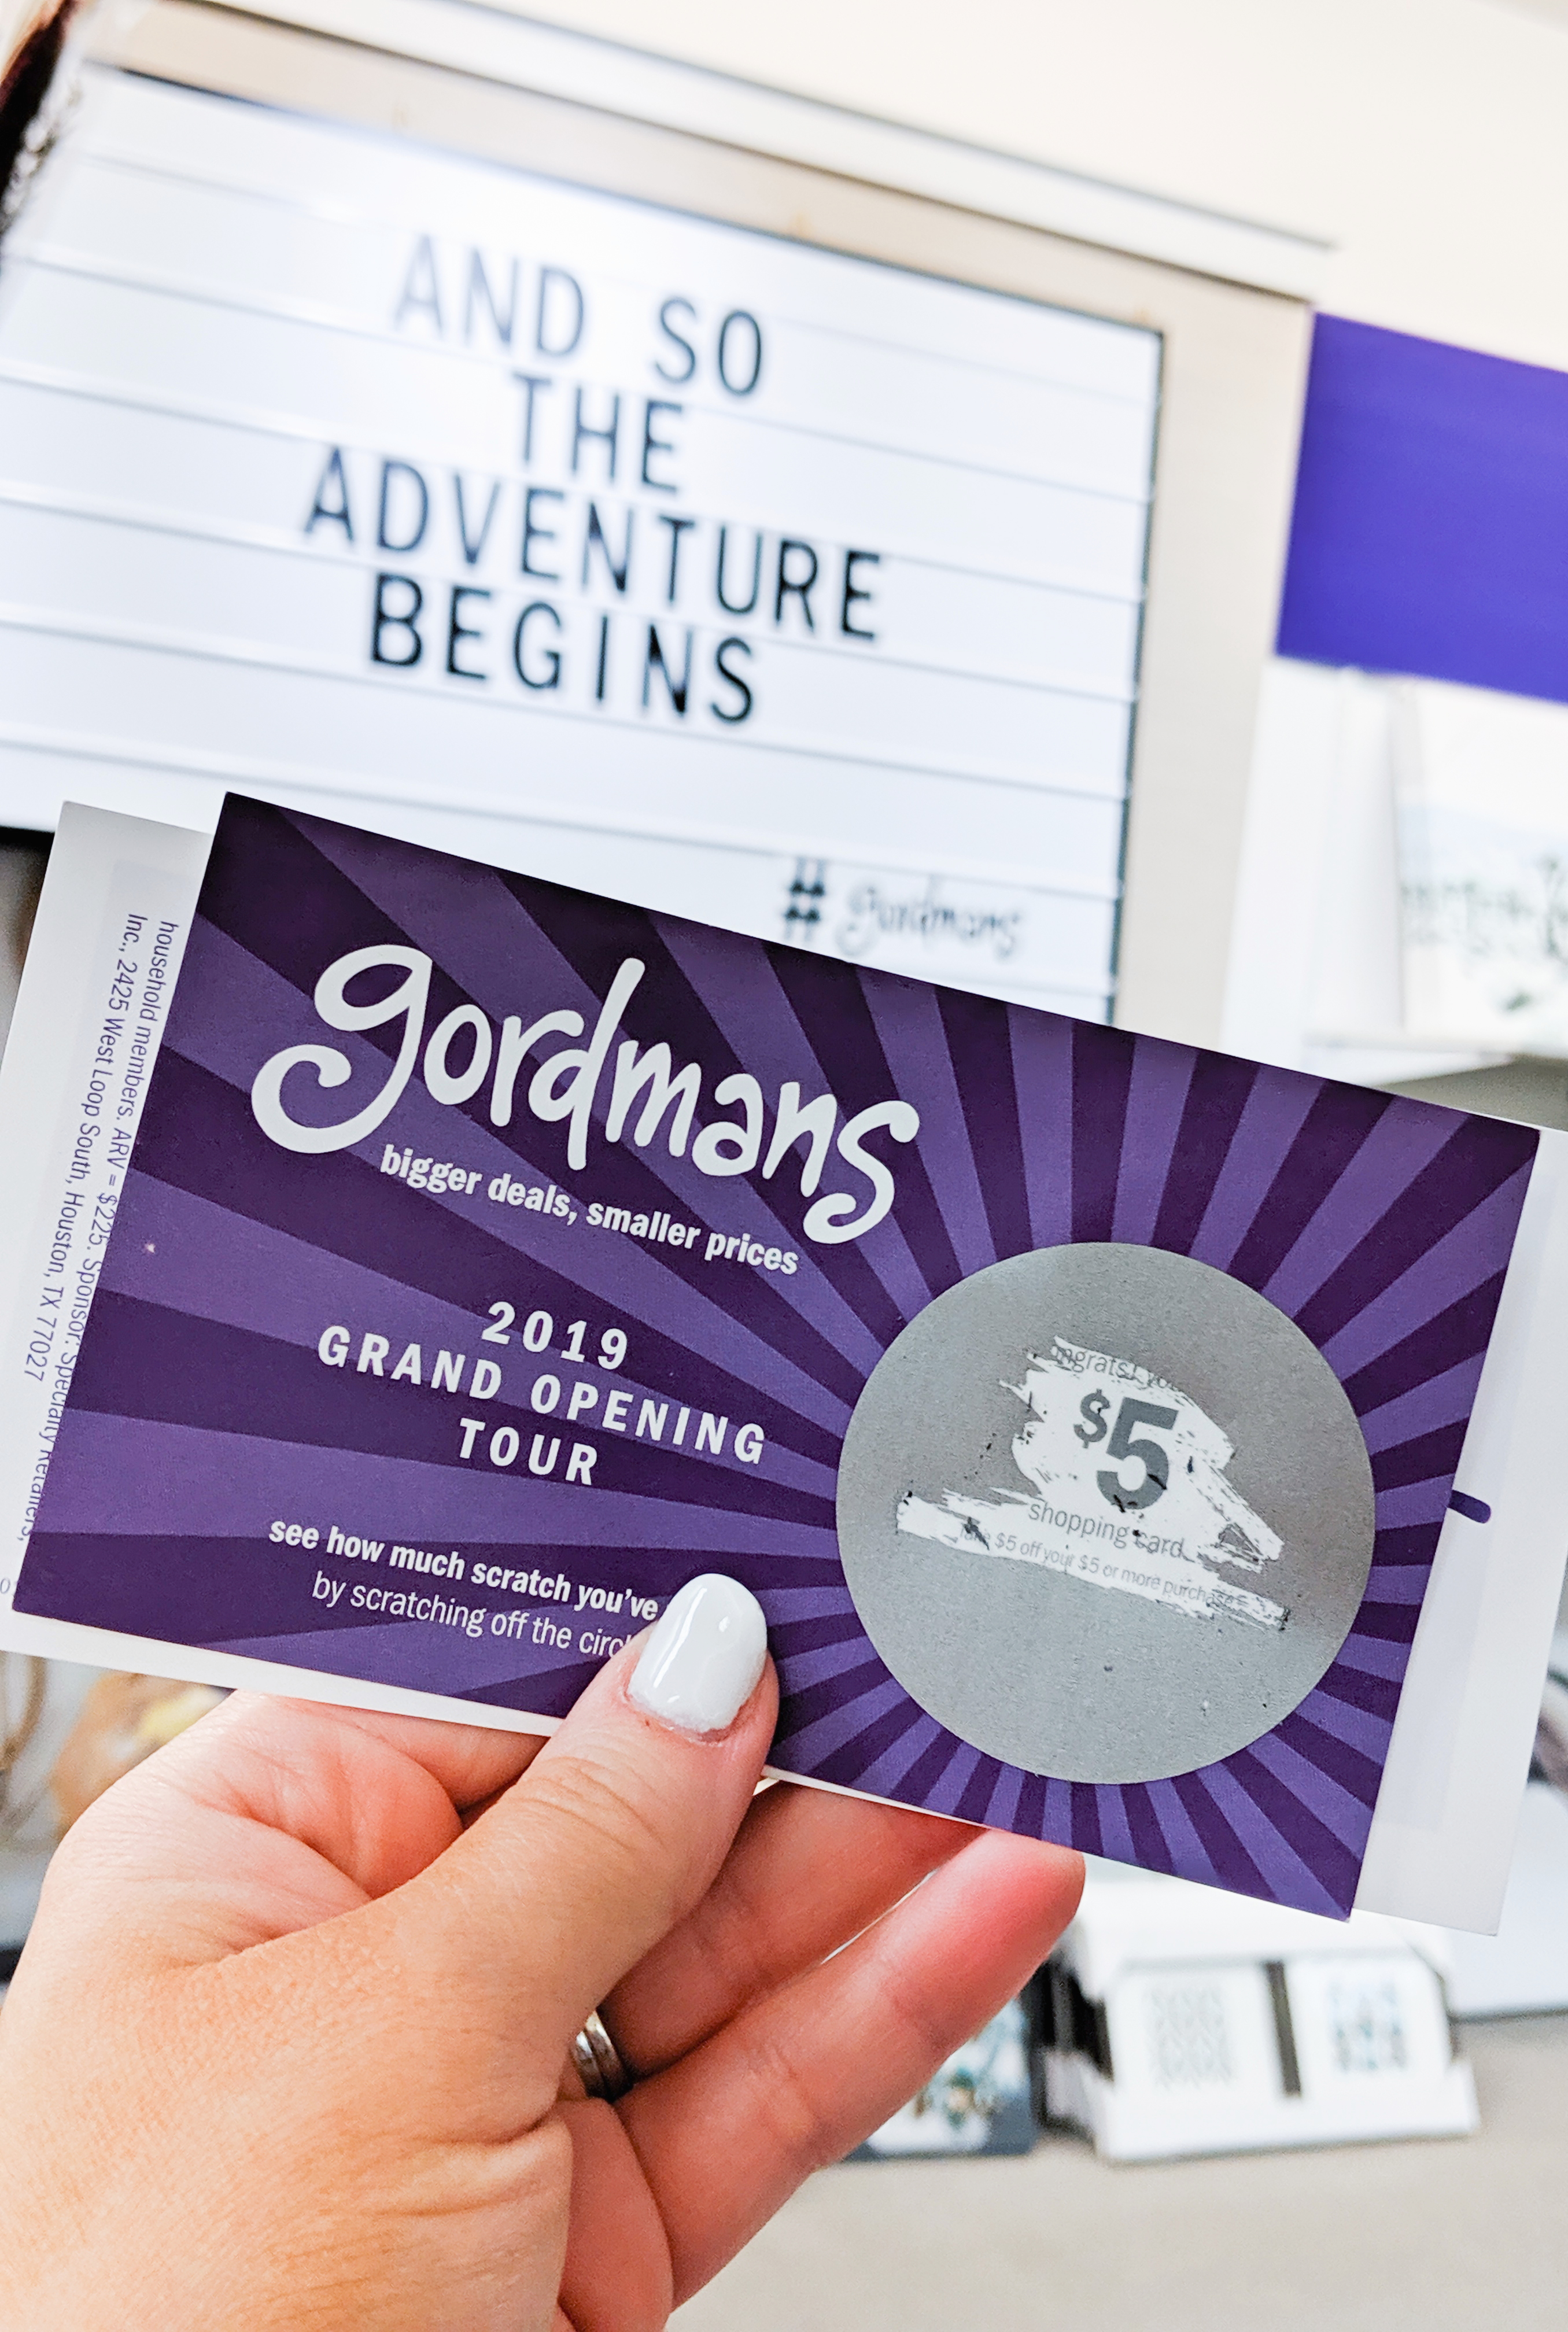 (ad) Gordmans Grand Opening Tour - Gordmans Dyersburg TN: How to shop at Gordmans! Find name-brand clothes, home decor, and more at irresistible prices at Gordmans. #GordmansisGrowing #GotitatGordmans #gthanks 